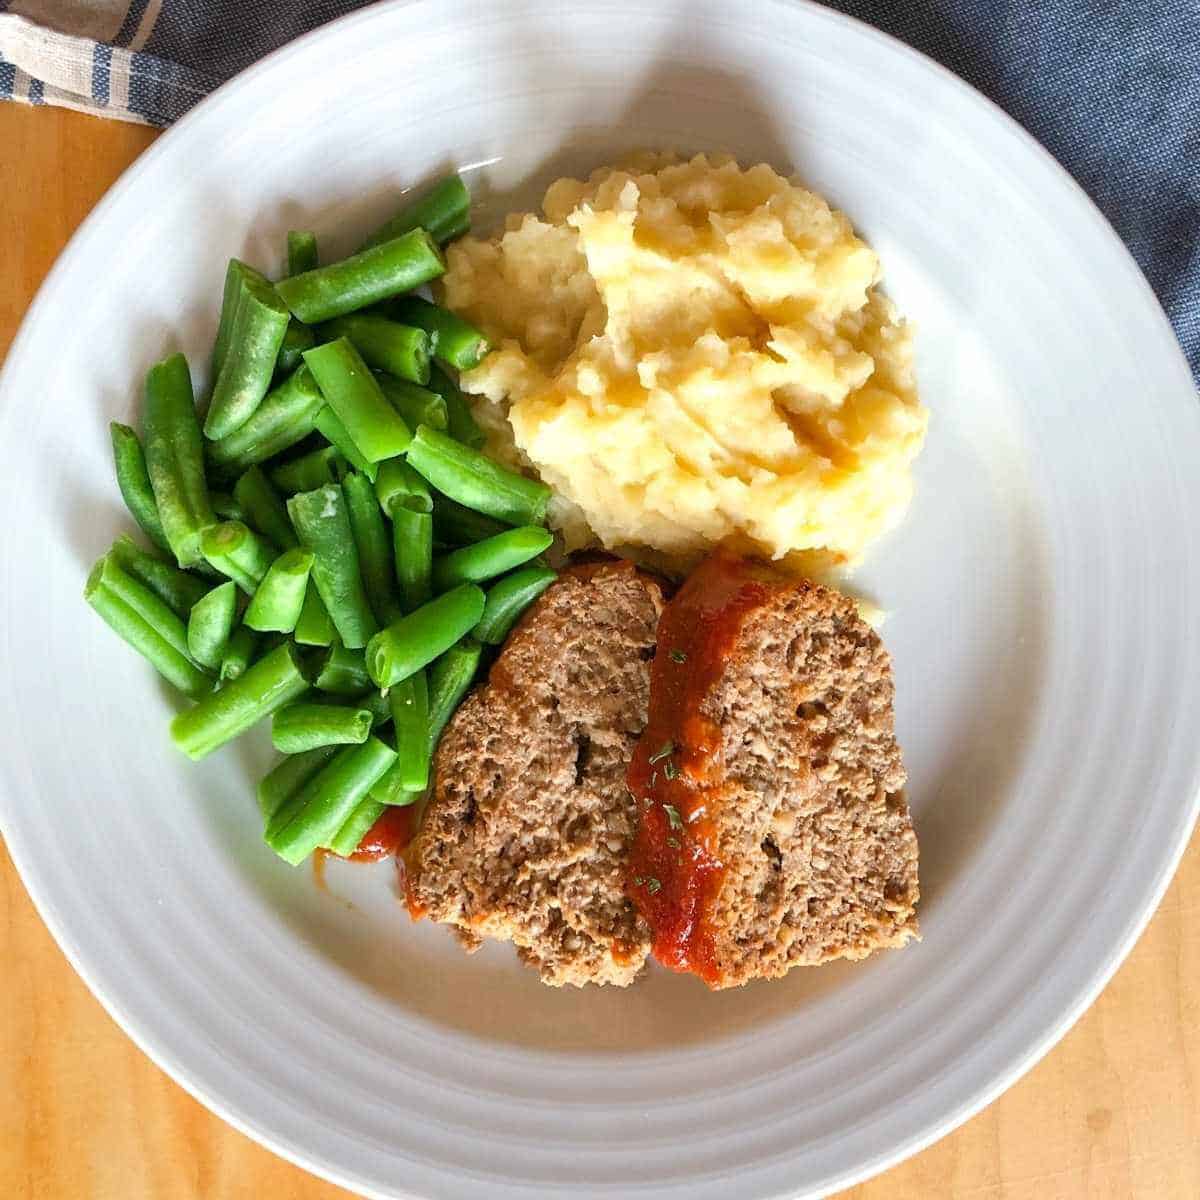 An overhead view of a plate with eggless meatloaf, mashed potatoes, and green beans.